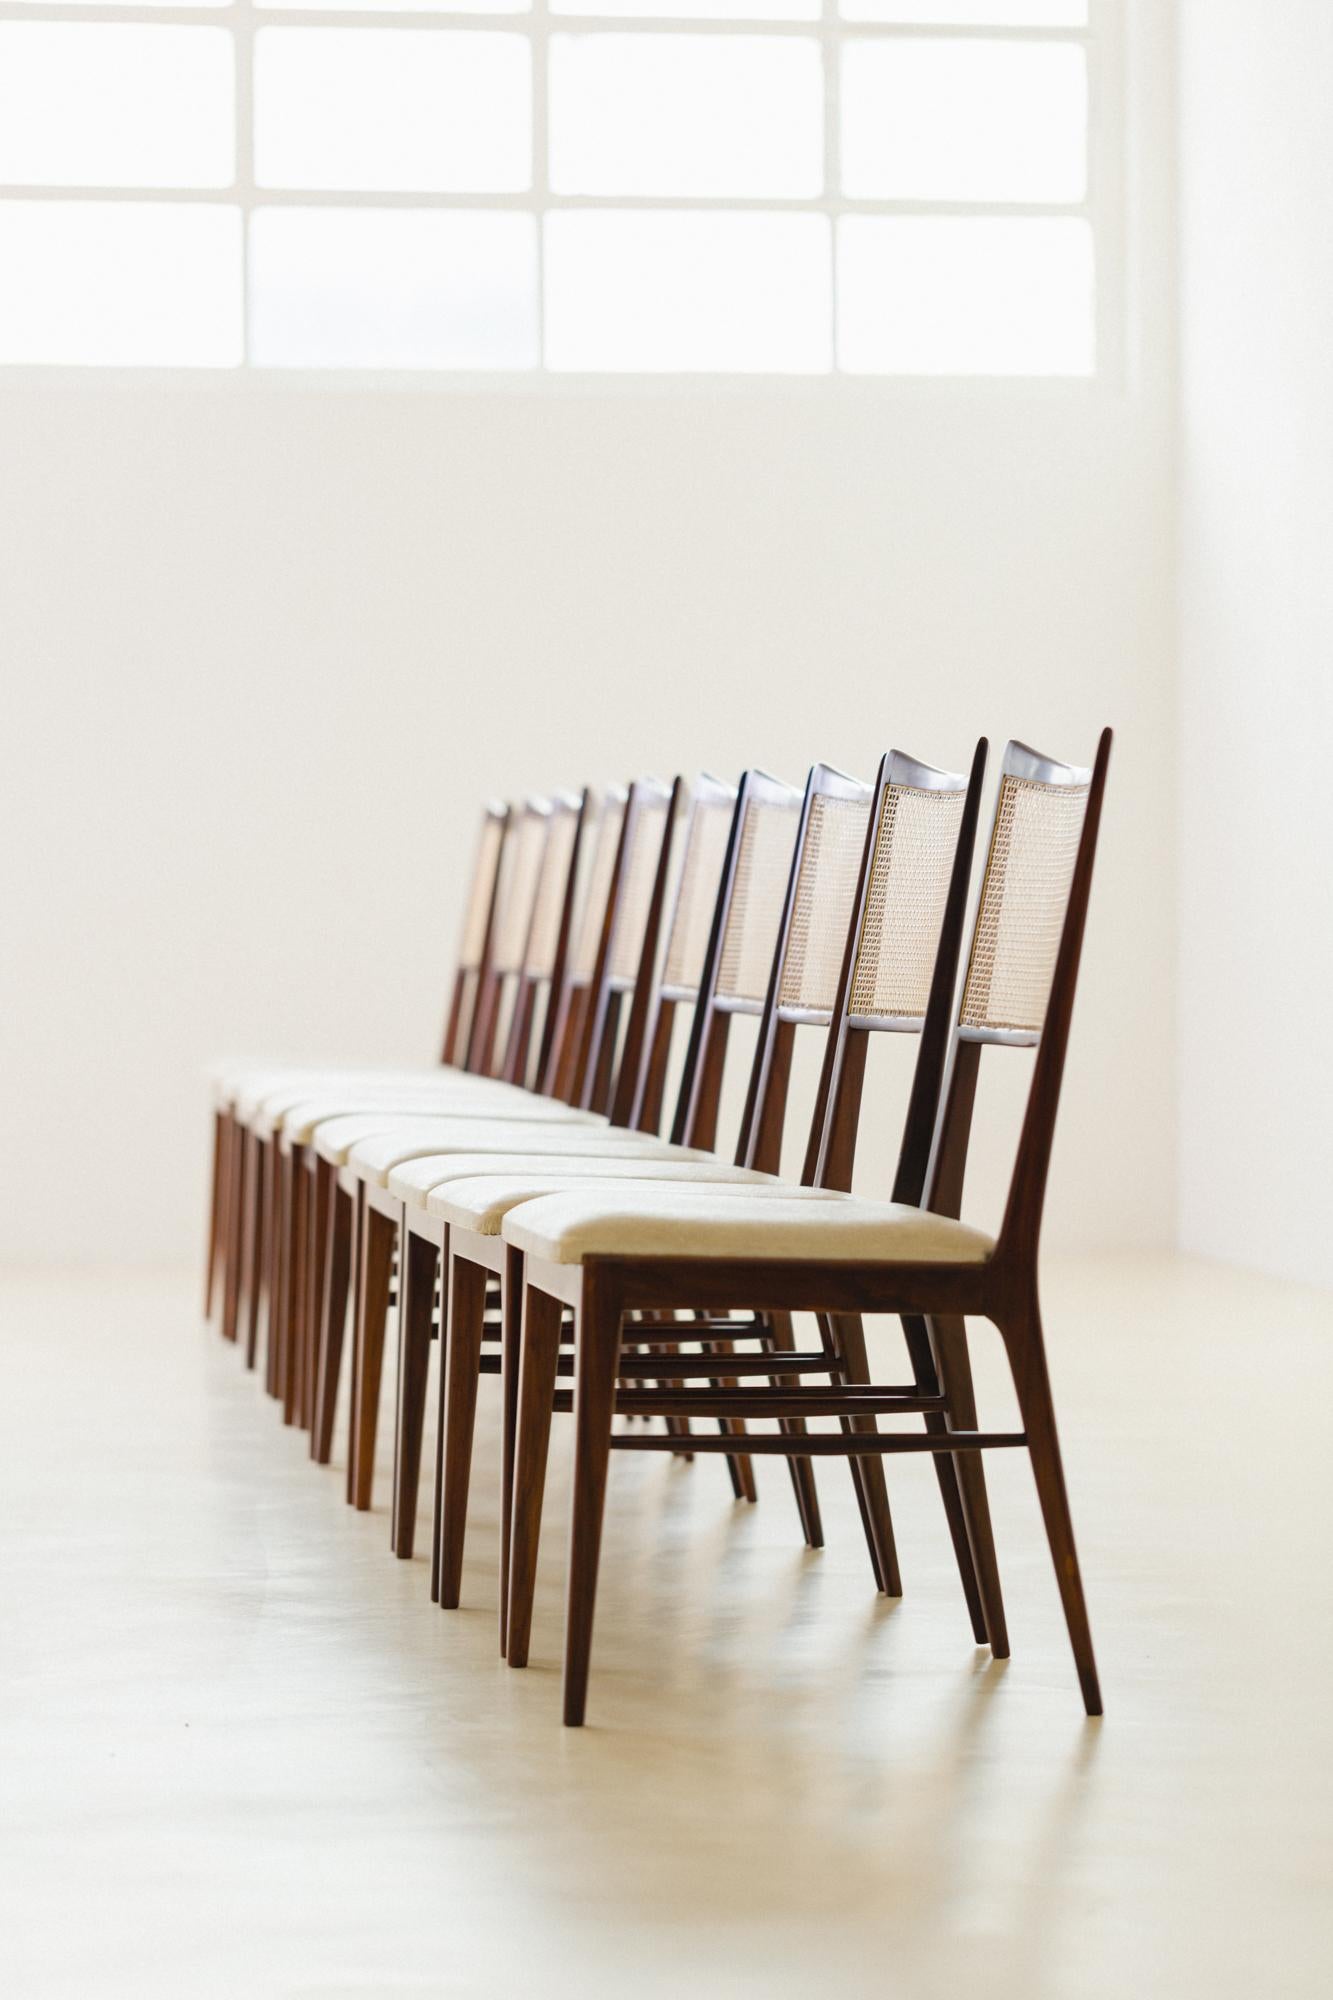 Set of 10 Rosewood and Cane Dining Chairs, Unknown Designer, 1950s For Sale 3